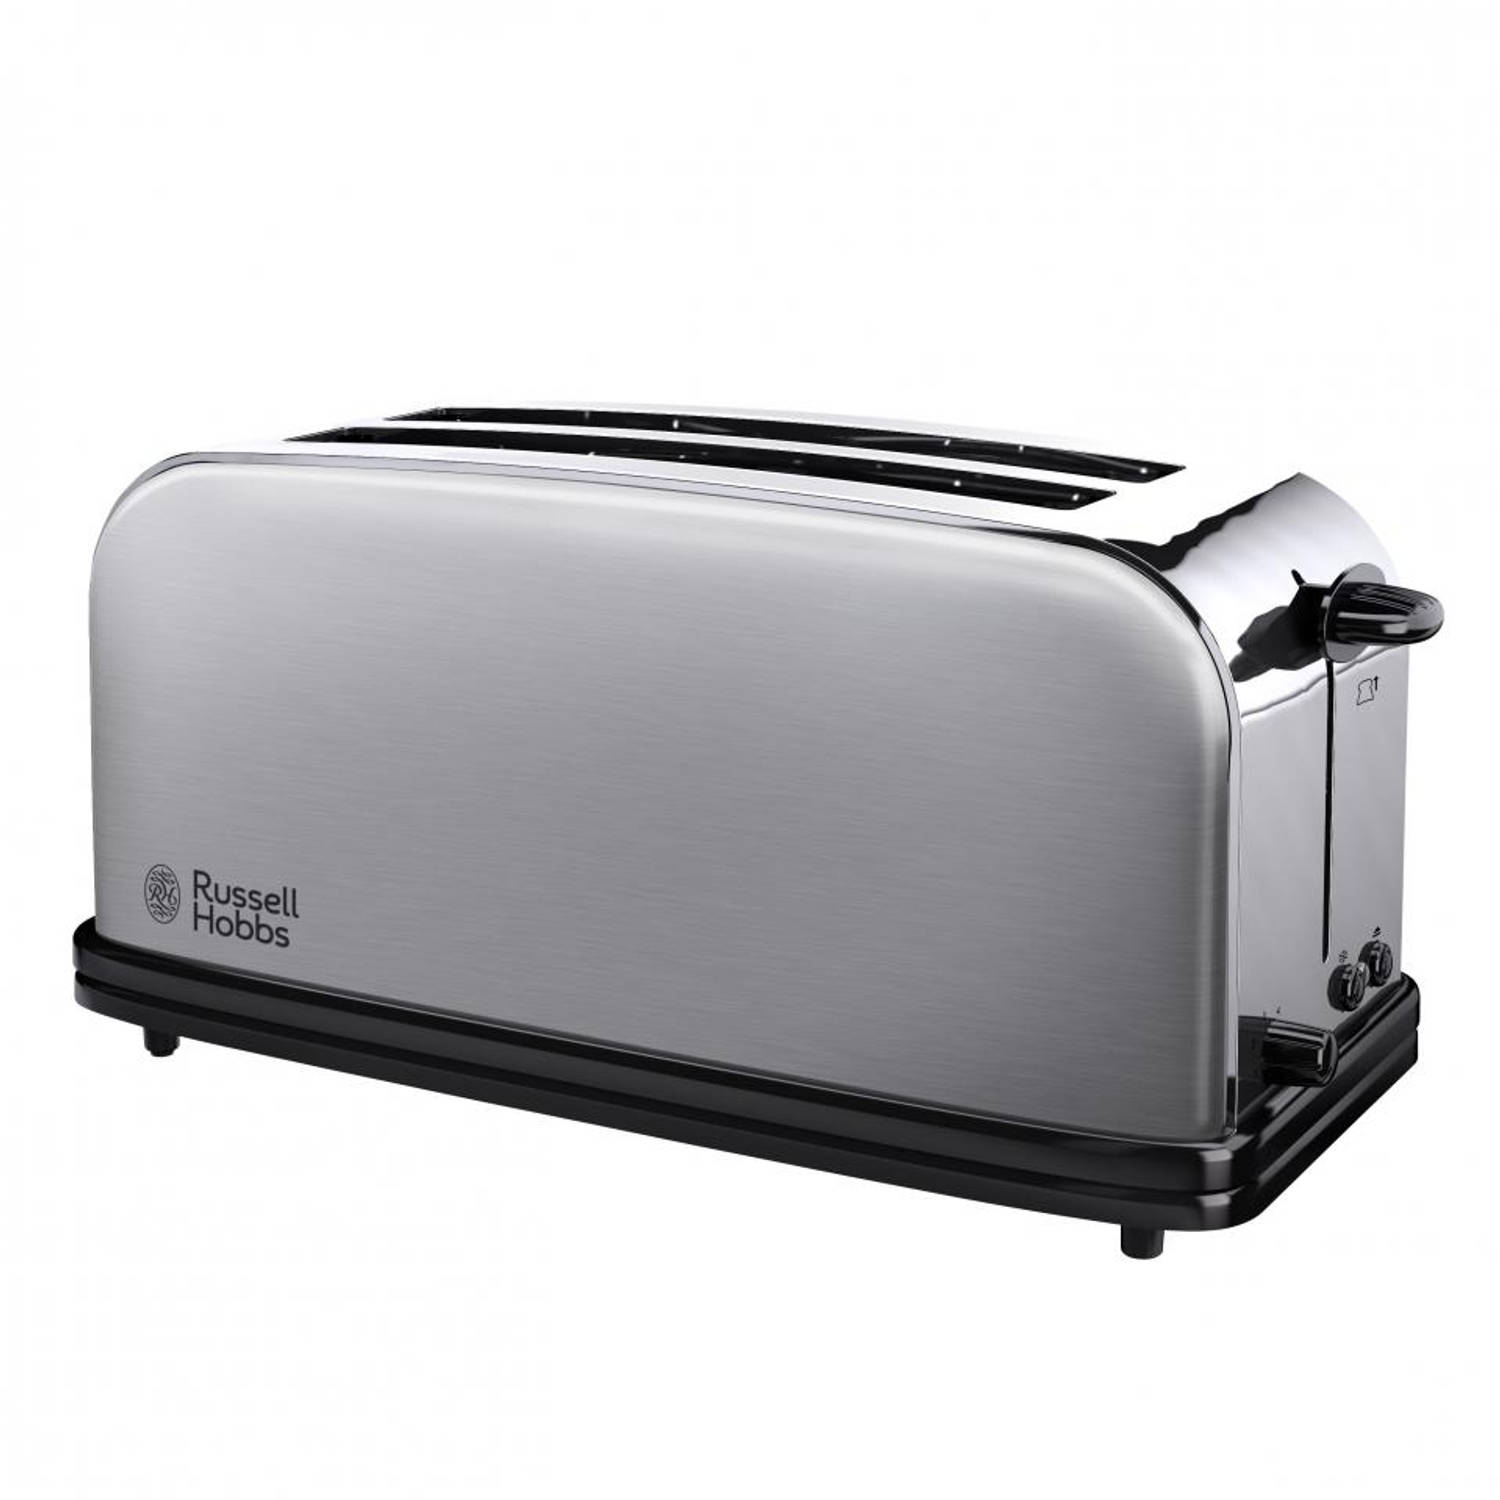 Russell Hobbs Toaster Oxford Long Slot 4 Slices 23610-56